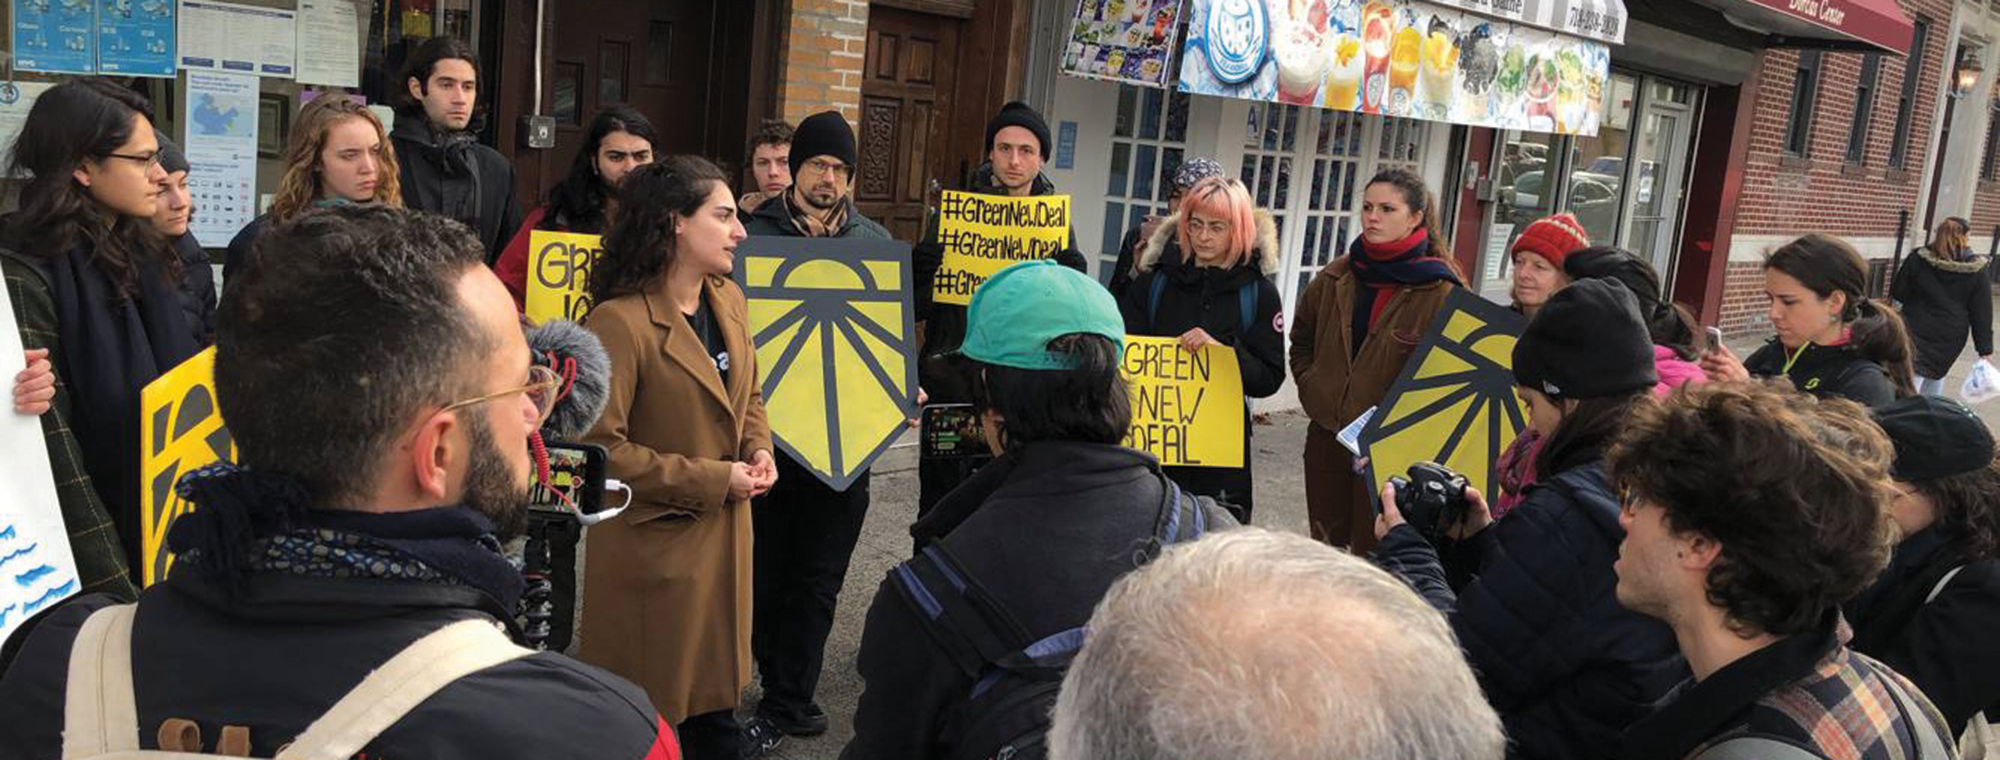 Organizing event with the Sunrise Movement in support of the Green New Deal. Image: Beyond the Bomb